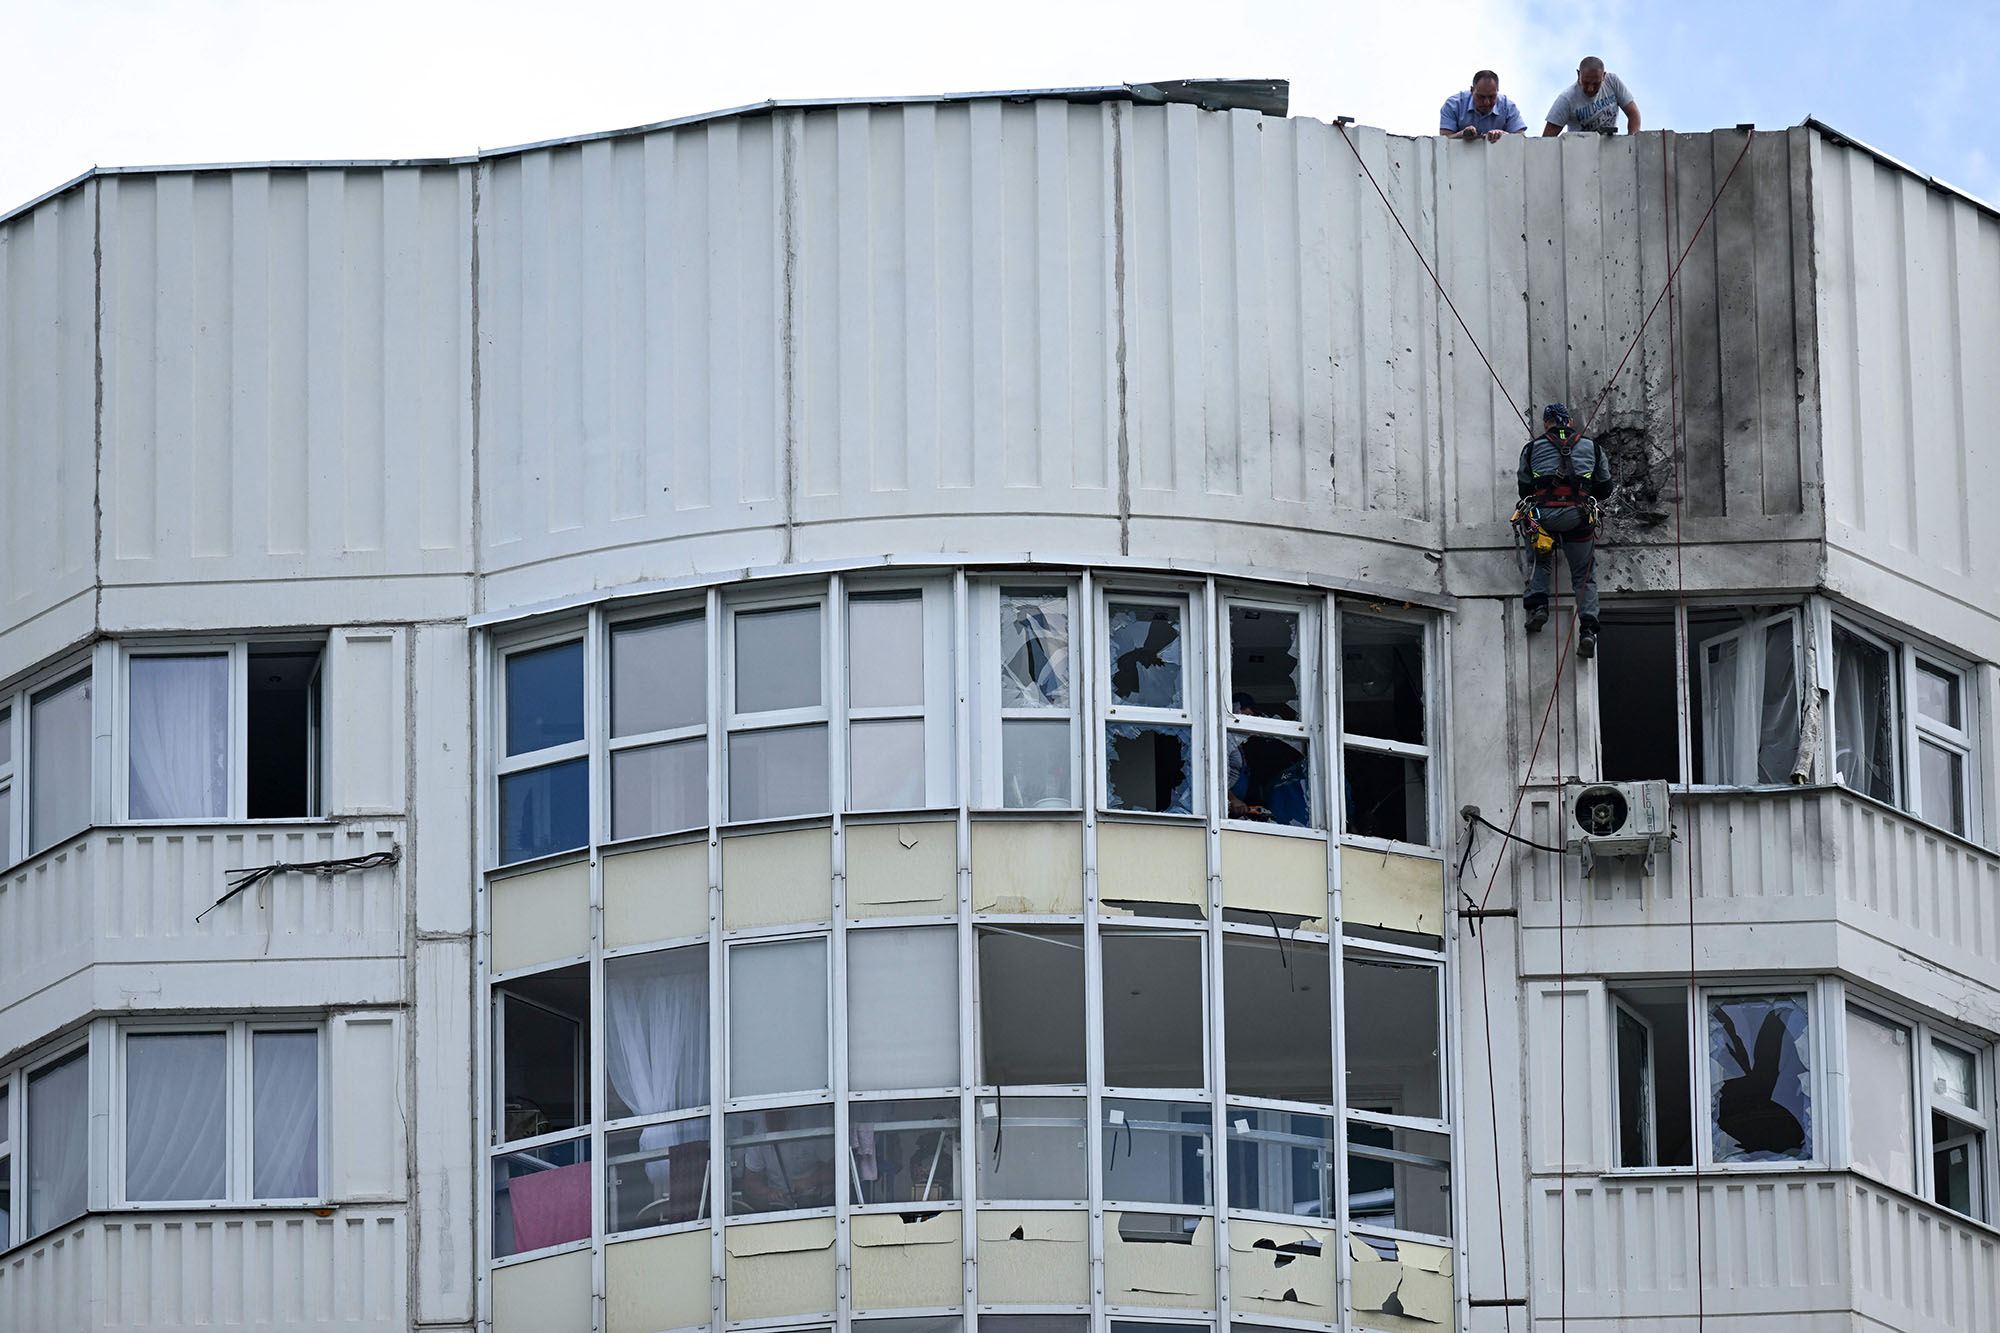 A specialist inspects the damaged facade of a multi-storey apartment building after a reported drone attack in Moscow, Russia, on May 30.